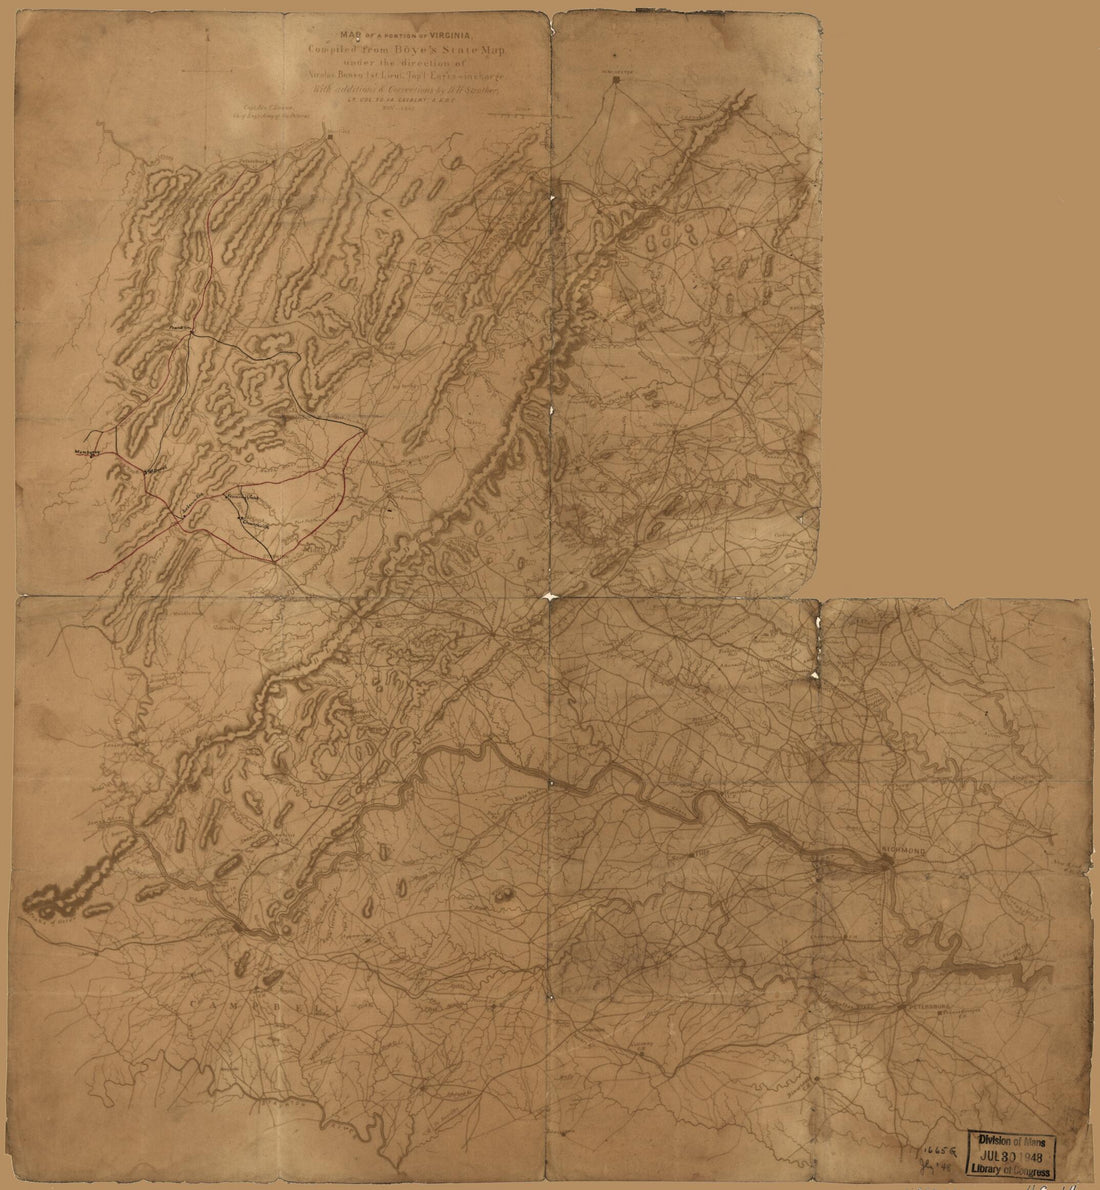 This old map of Map of a Portion of Virginia from 1862 was created by Nicolas Bowen, Herman Böÿe, James C. (James Chatham) Duane, David Hunter Strother in 1862